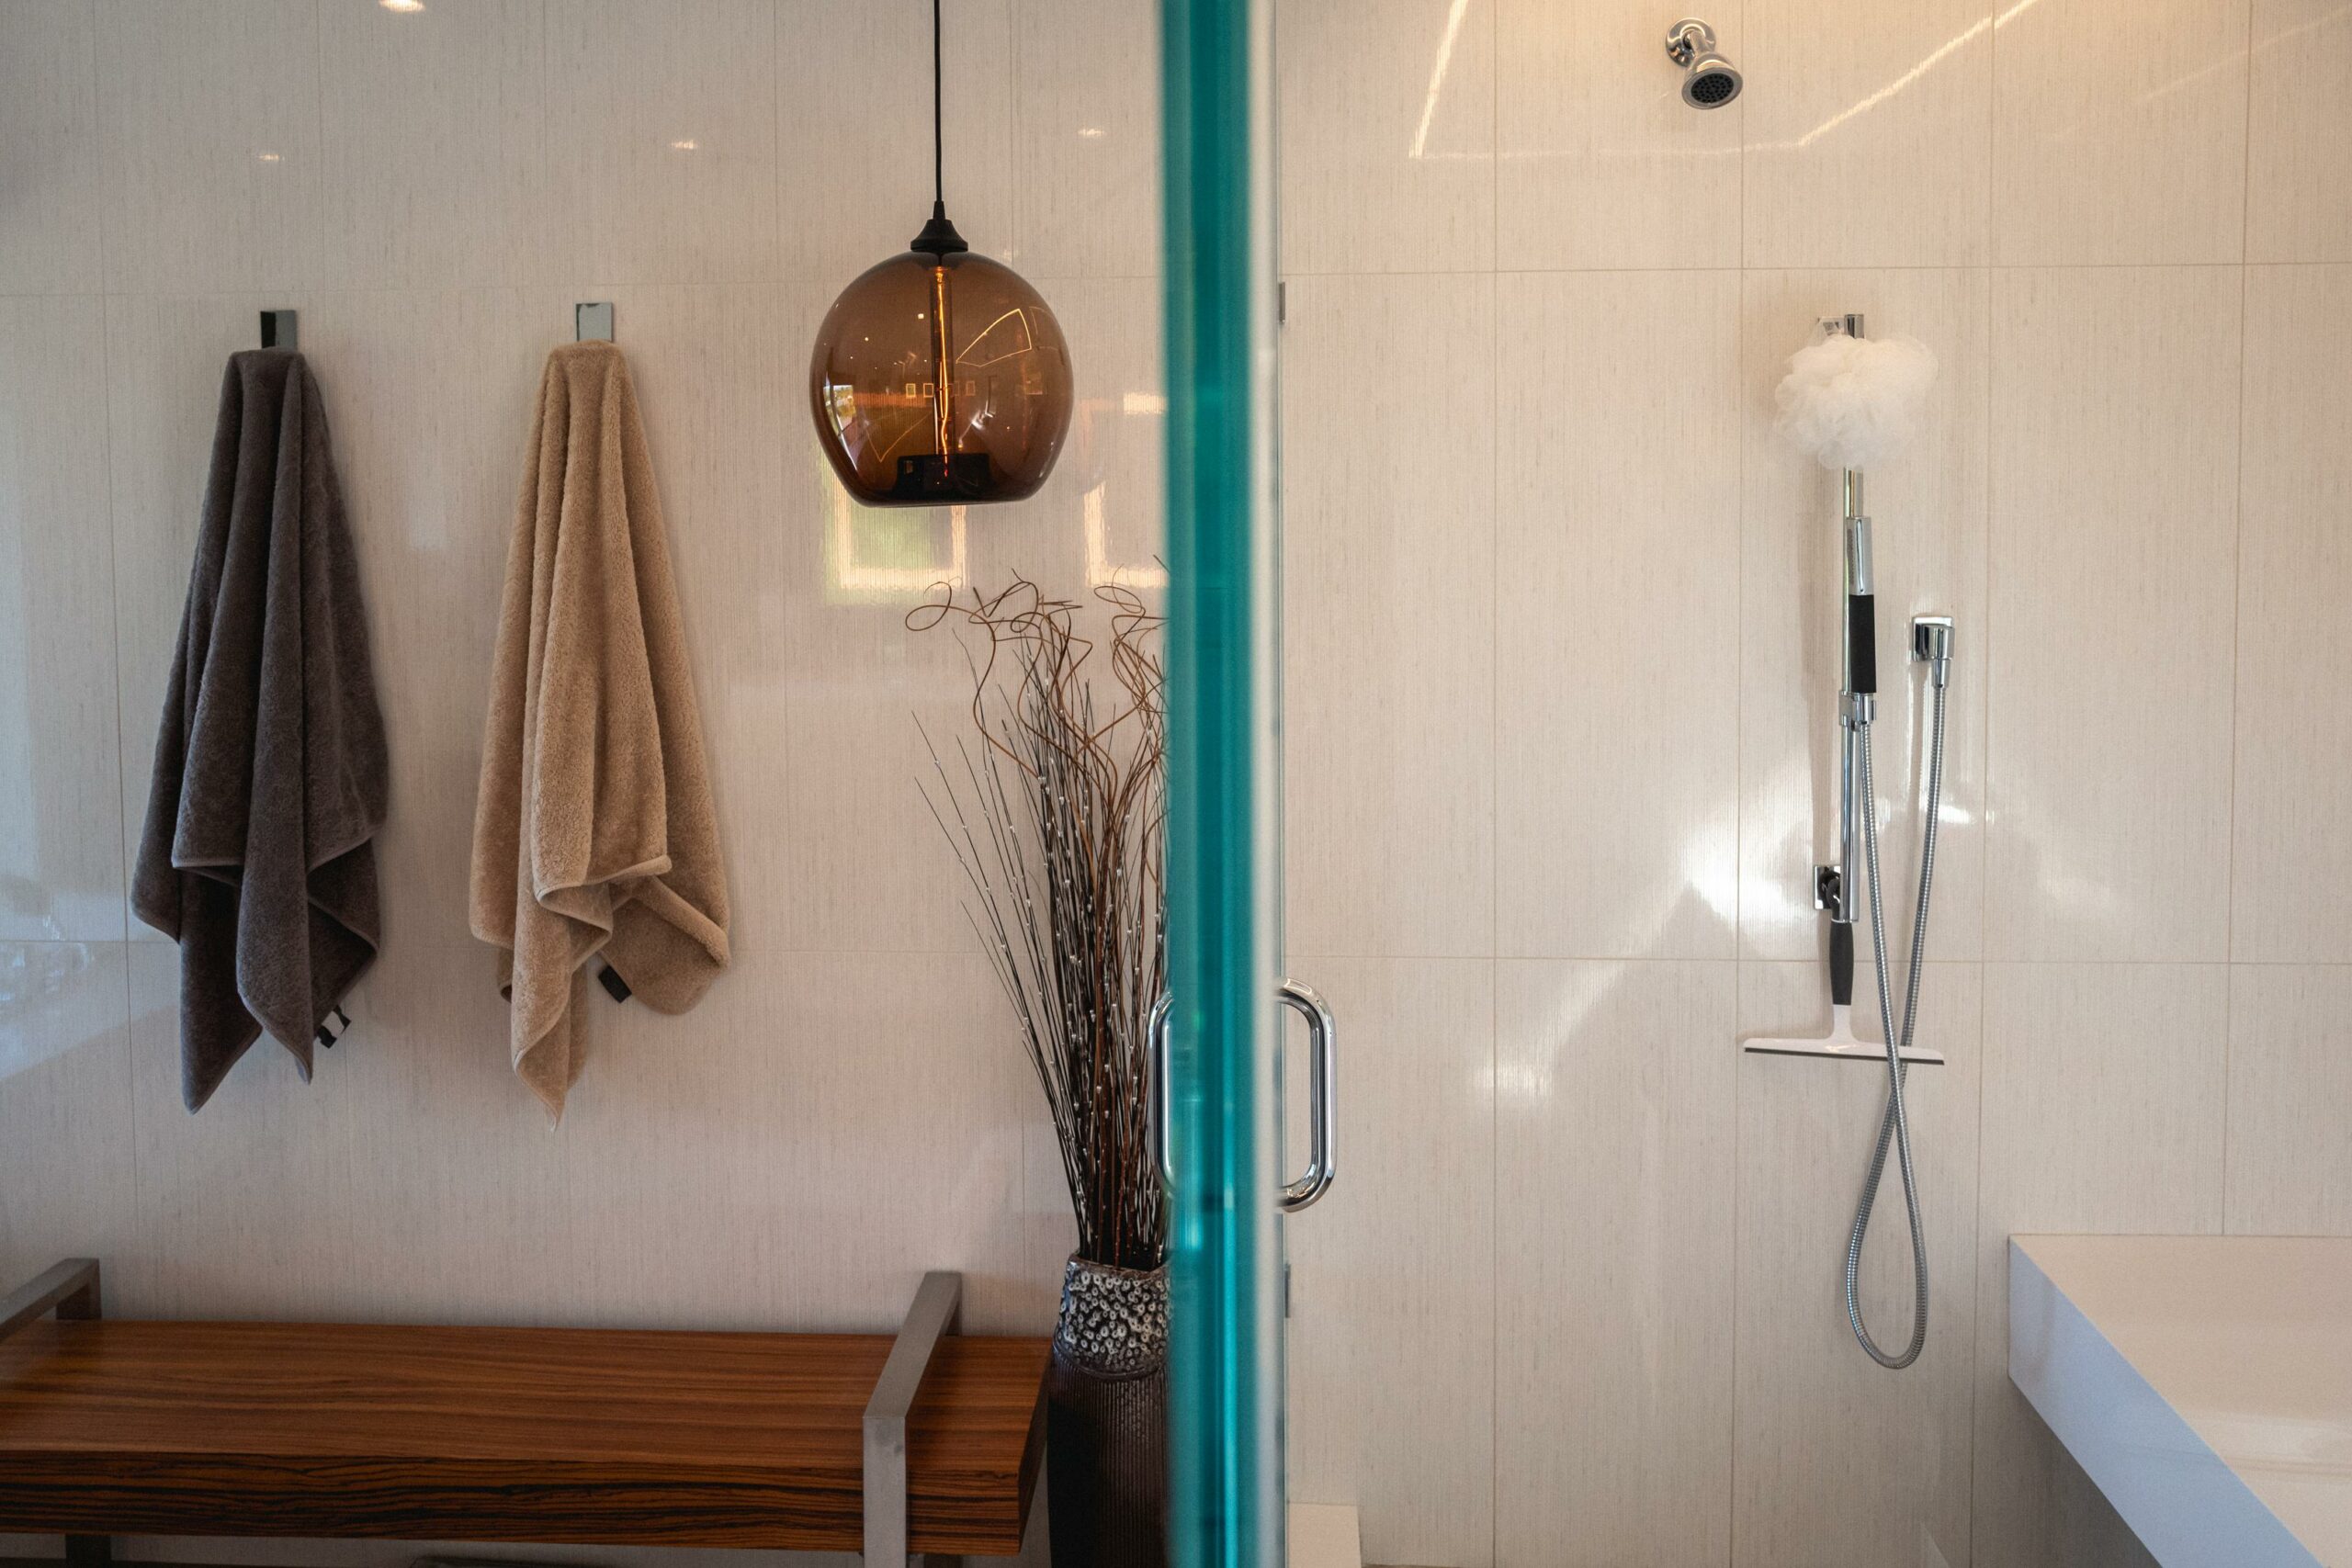 Modern bathroom interior with shower and wooden bench.